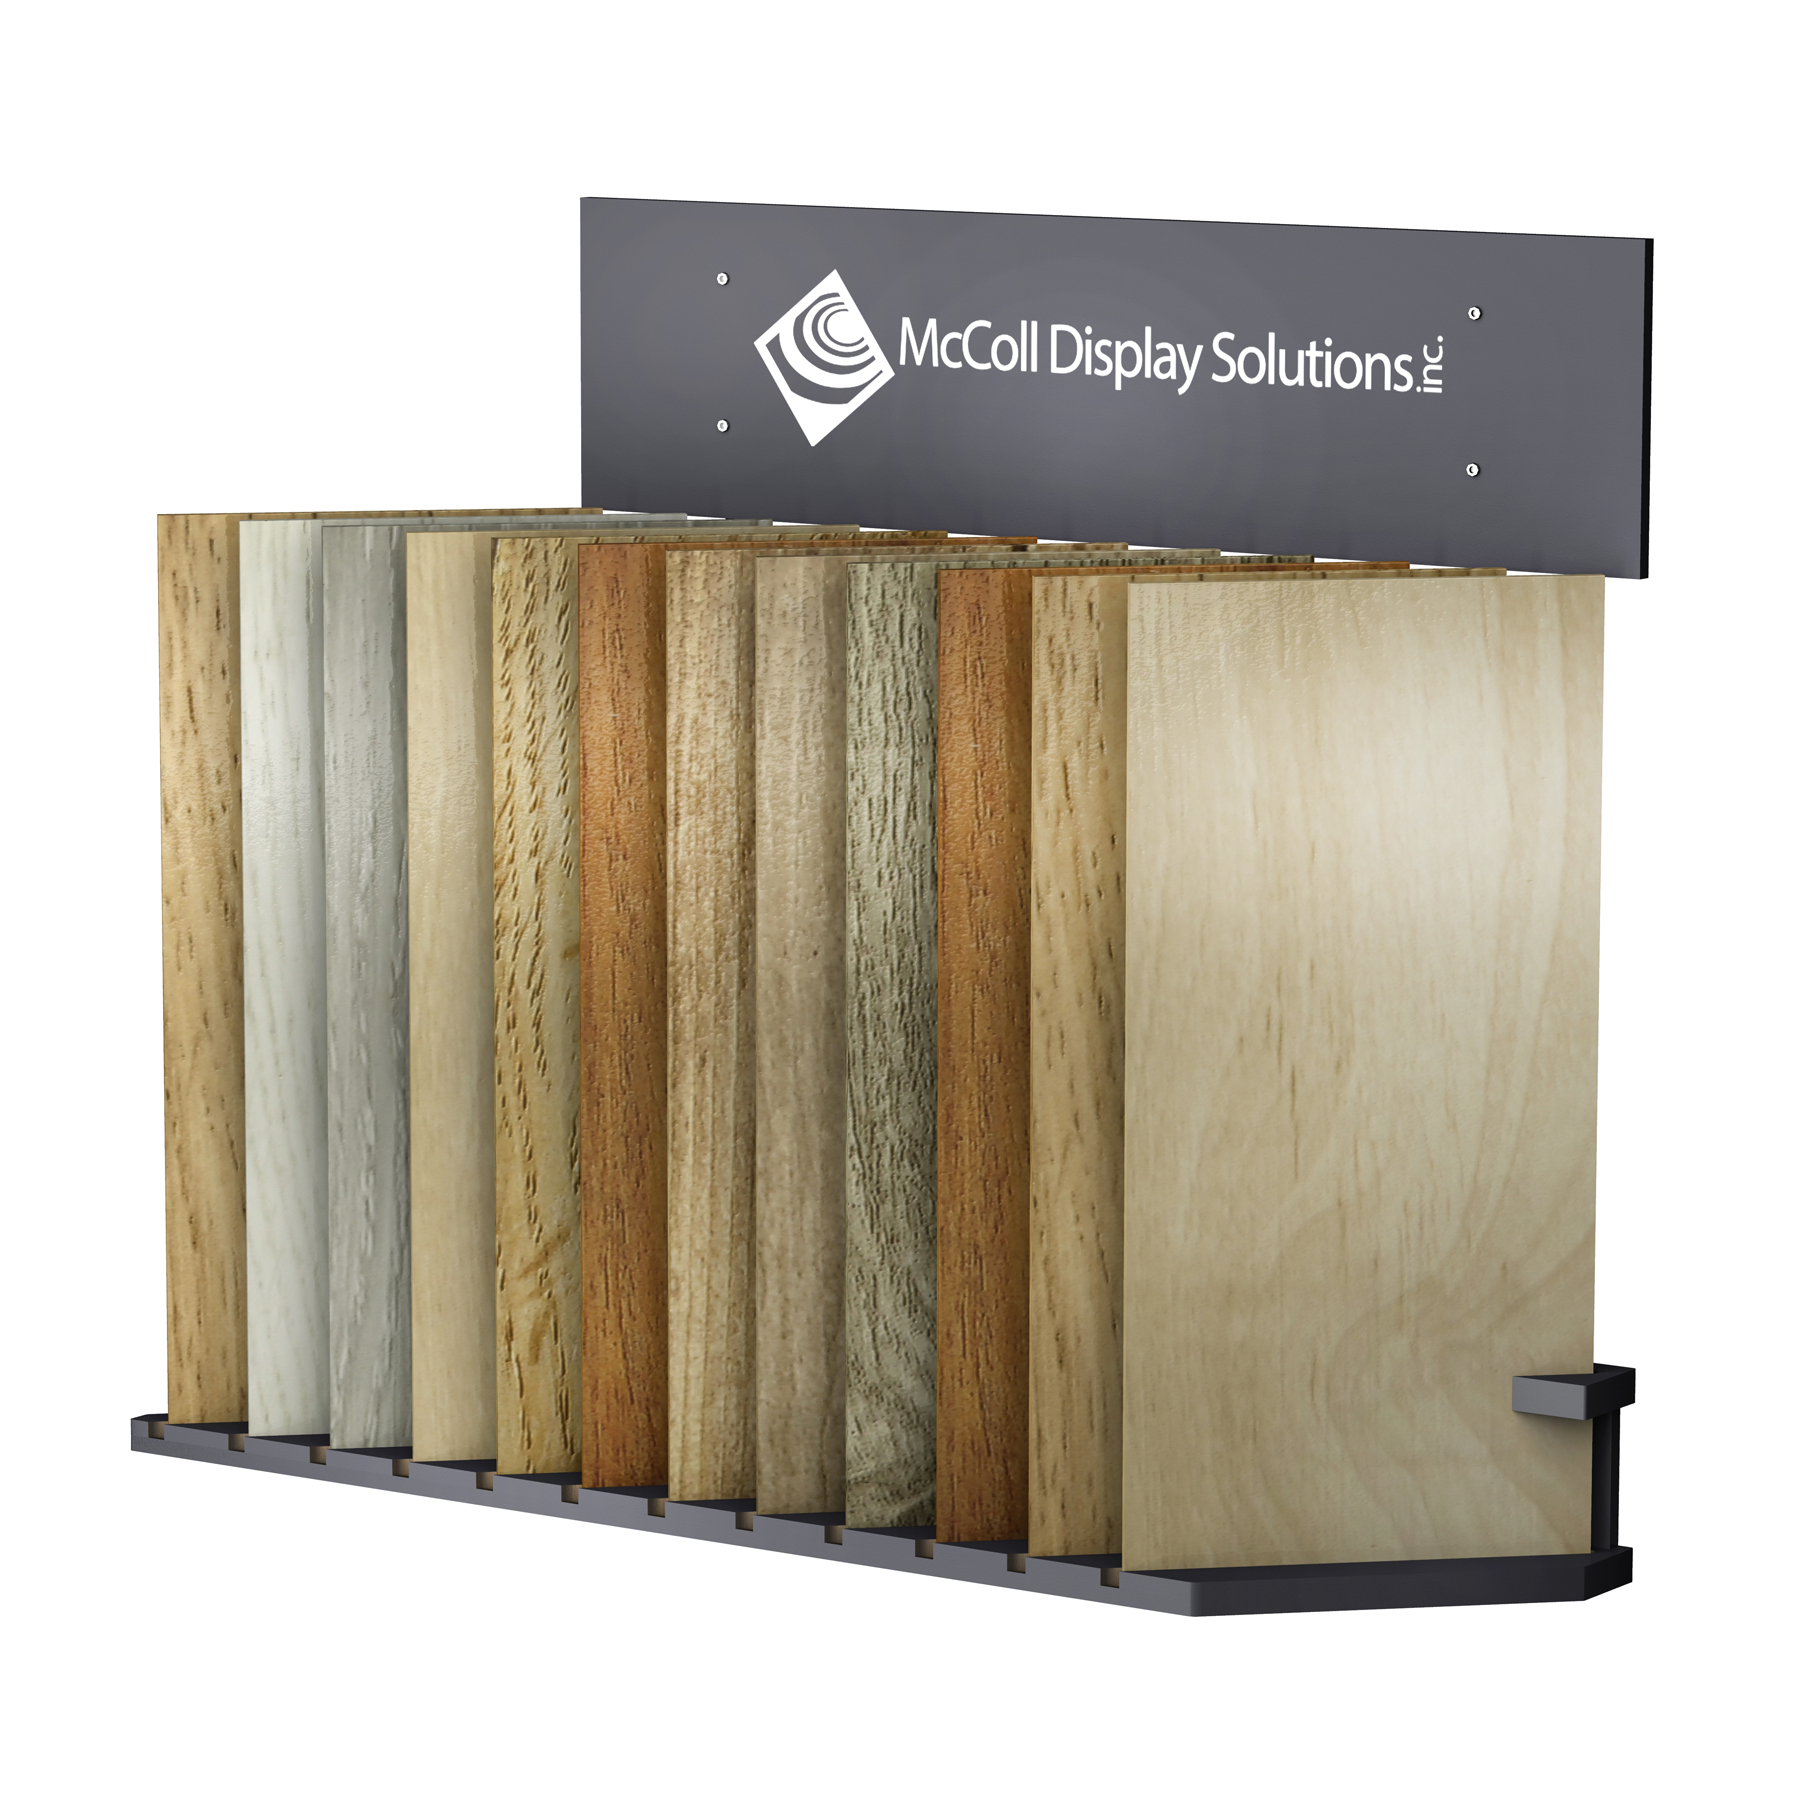 CD100 Slotted Floor Stand with Signage Displays Hardwood or Laminate Planks as well as Tile Marble Stone Flooring Samples